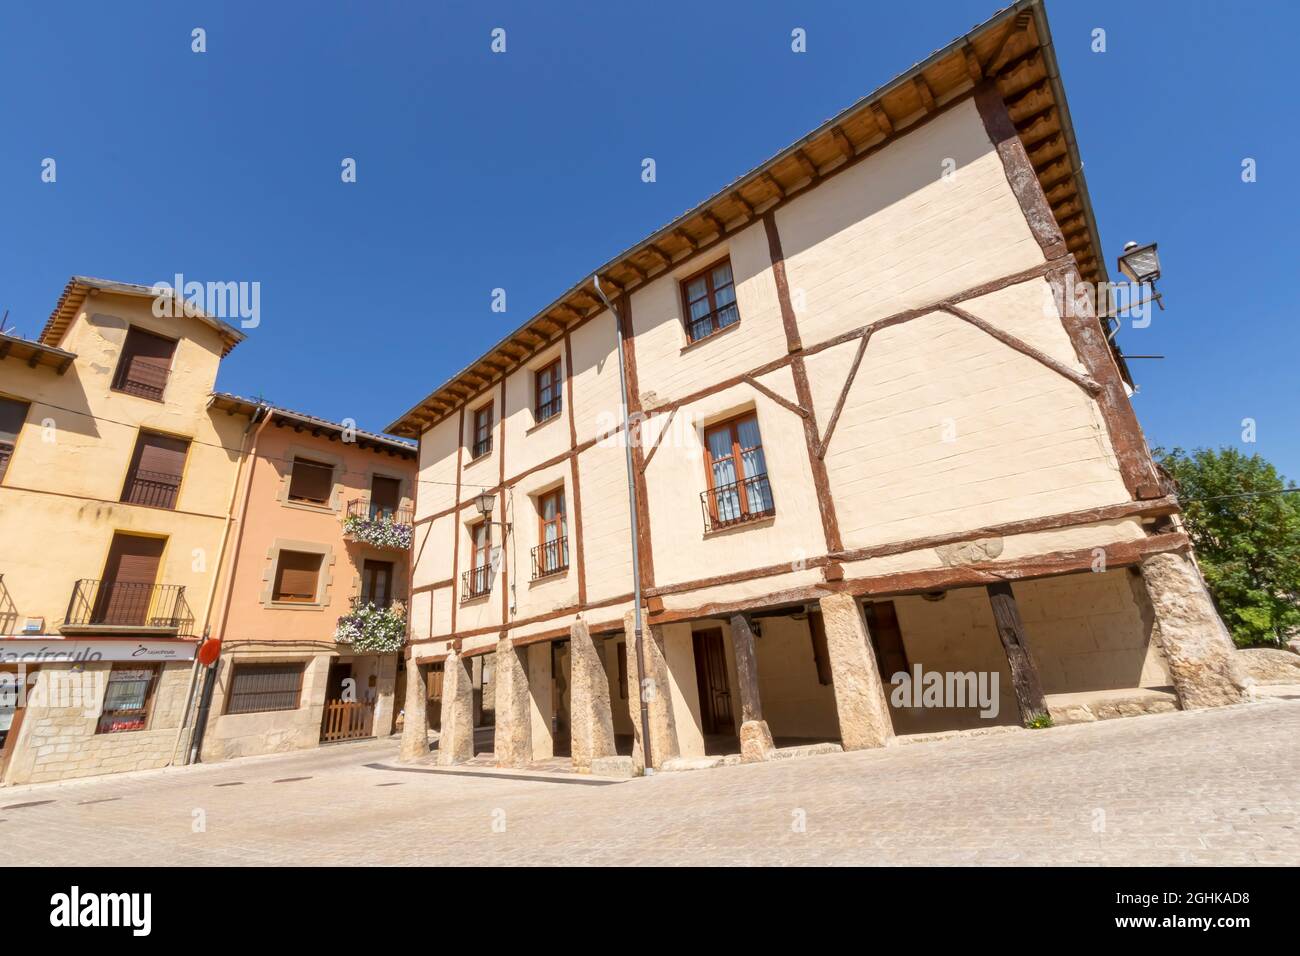 Medieval facades and buildings in Pancorbo village, Burgos province, Spain Stock Photo